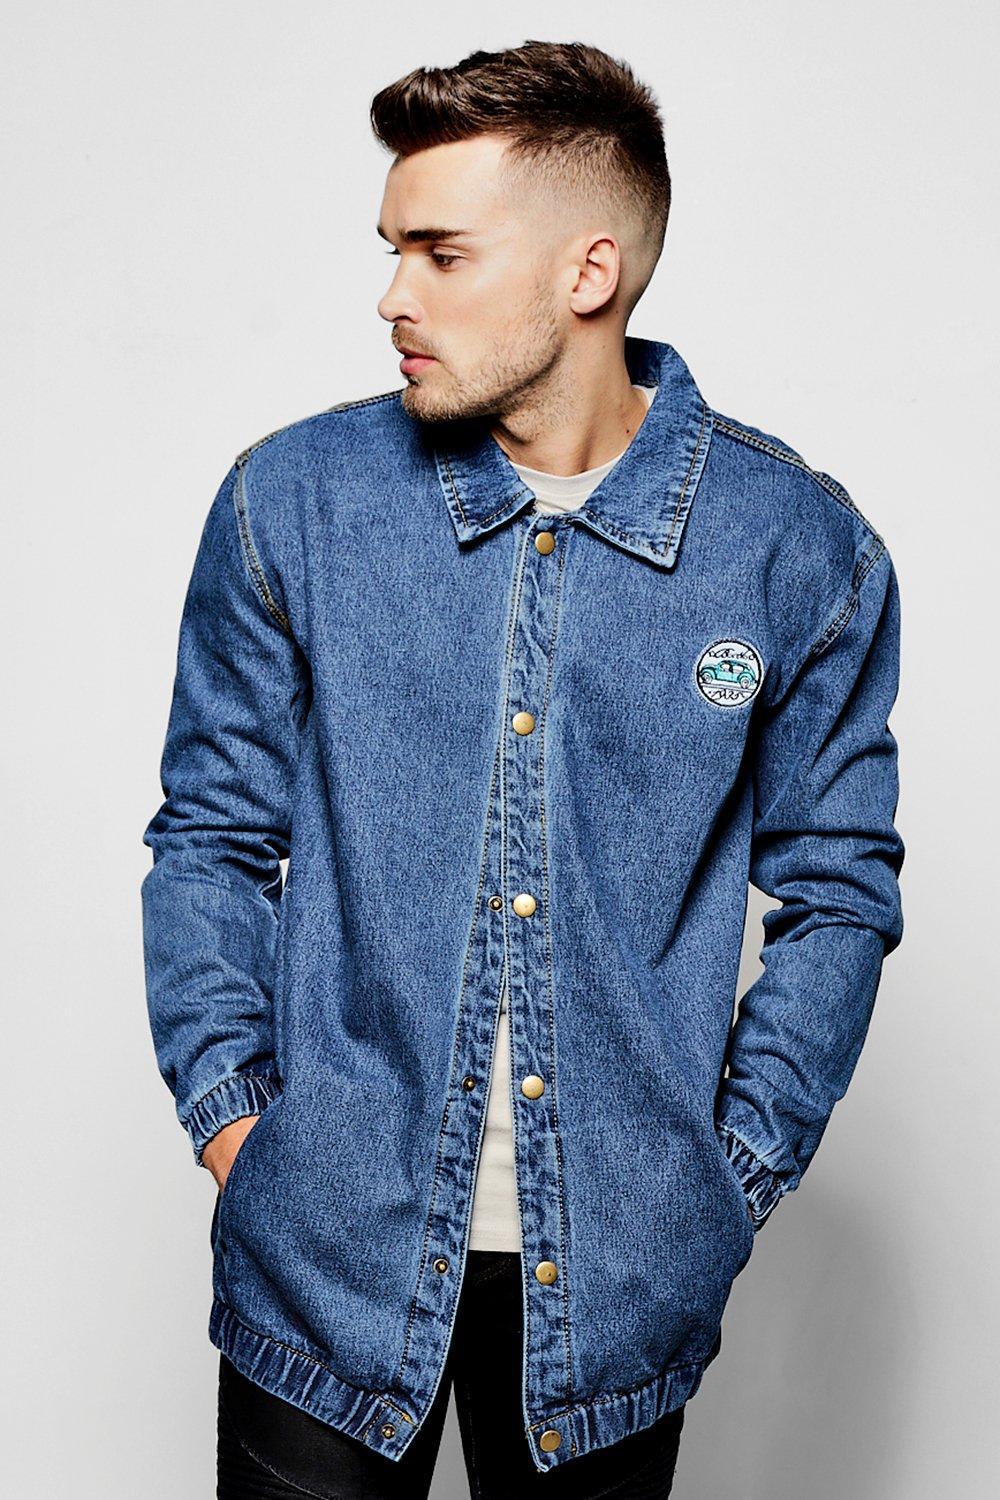 Boohoo Denim  Coach Jacket  With Popper Front in Blue for 